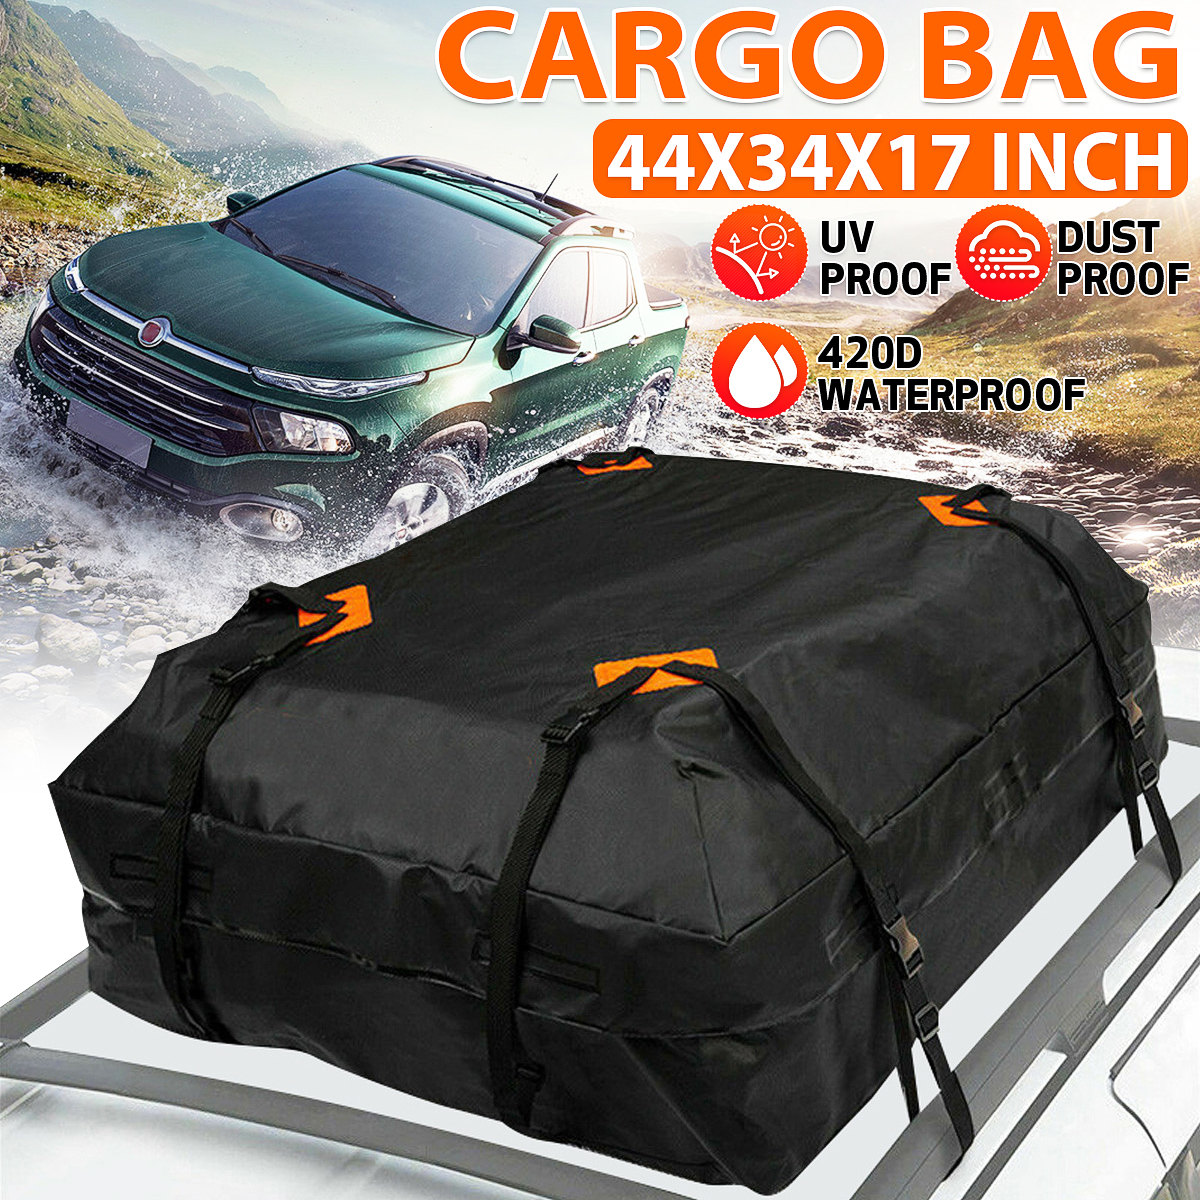 475L-Car-Rooftop-Cargo-Bag-420D-Waterproof-Car-Top-Carrier-Bag-Luggage-Storage-for-Outdoor-Travel-Ca-1888699-1